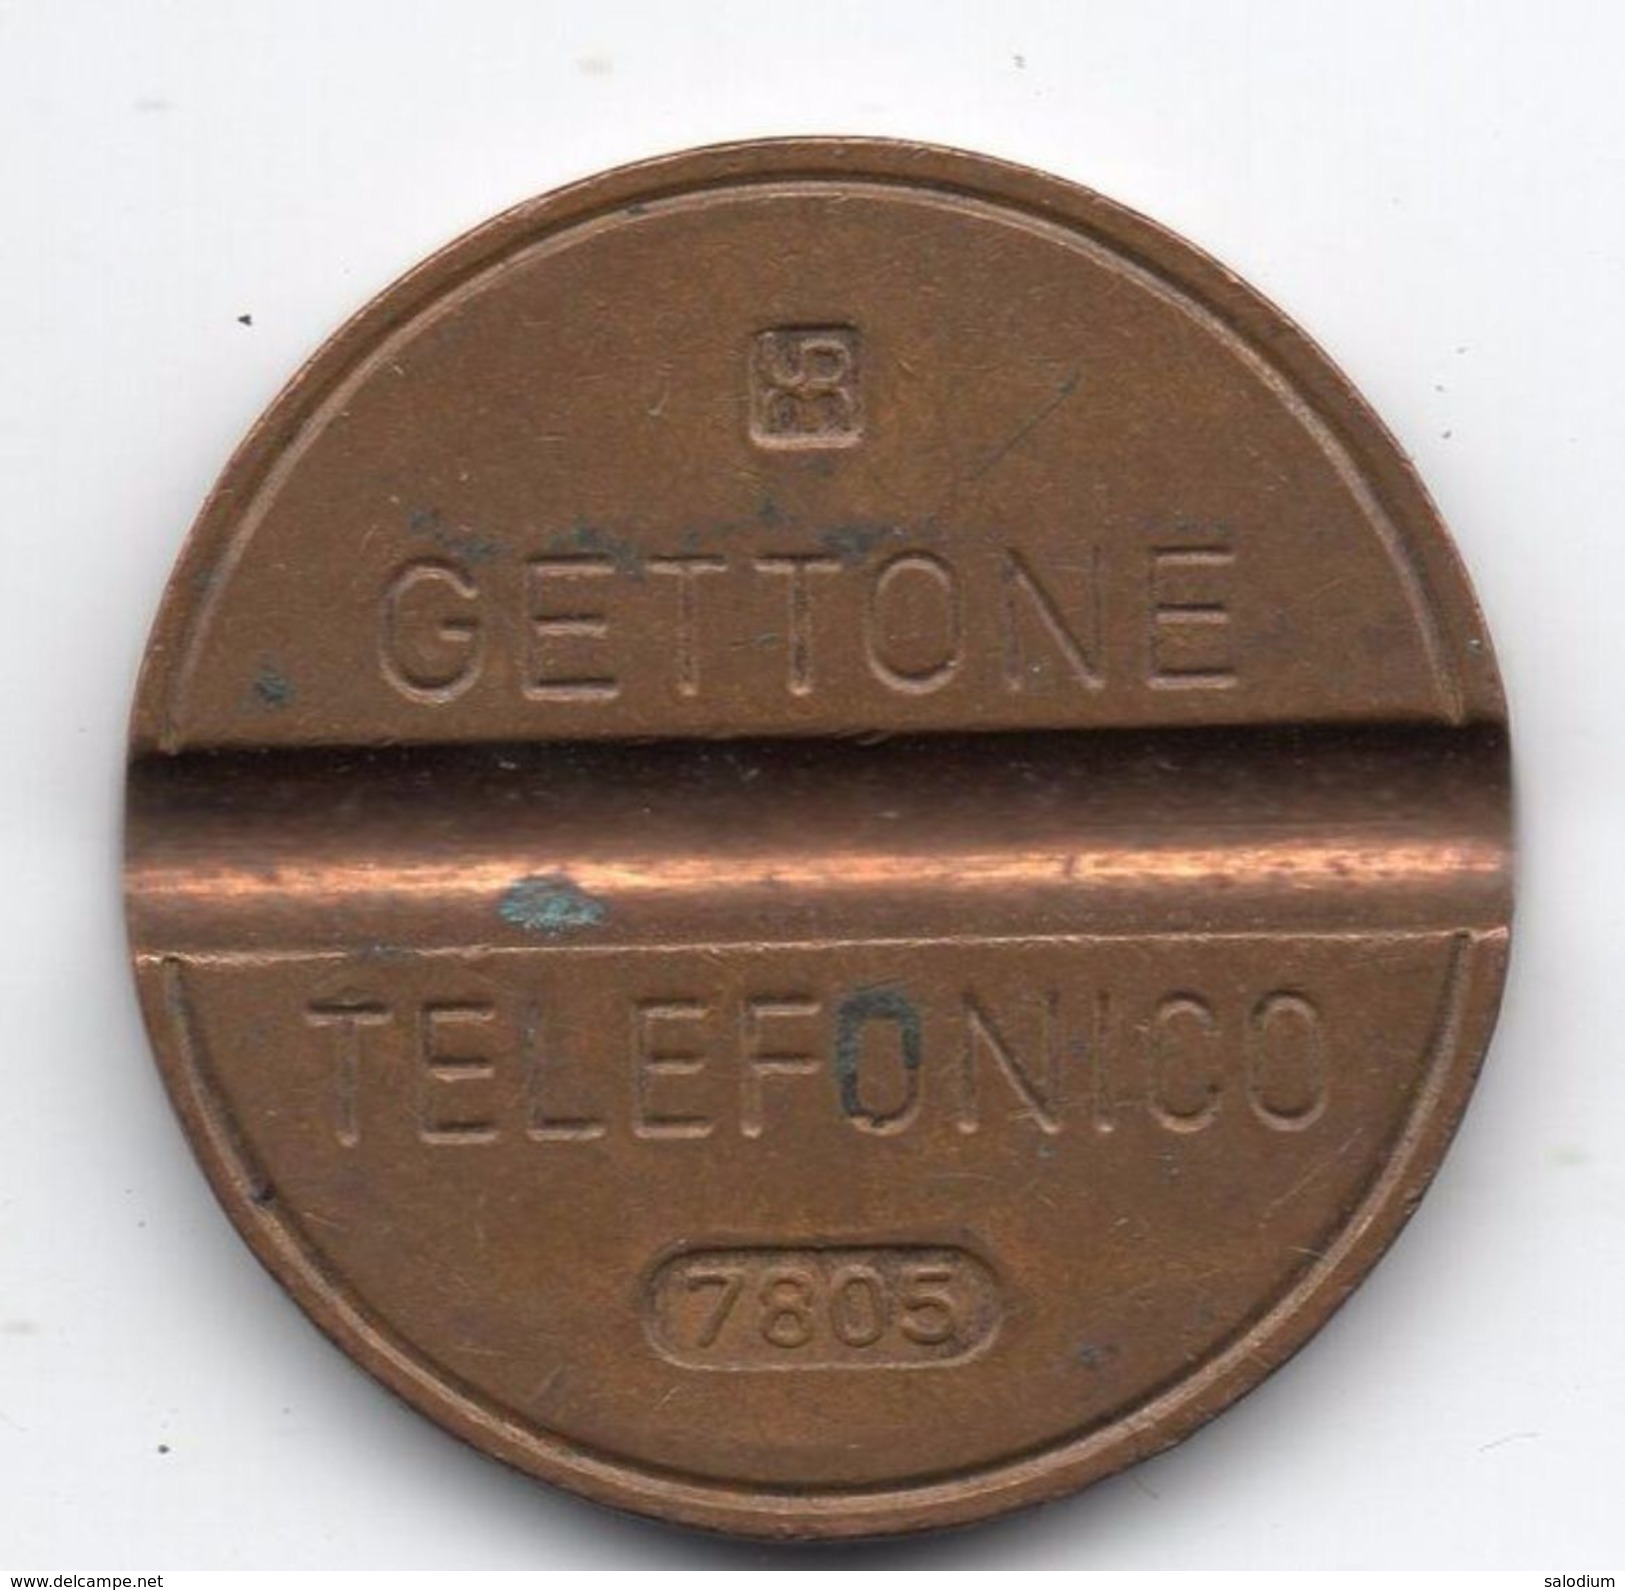 Gettone Telefonico 7805 Token Telephone - (Id-859) - Professionals/Firms